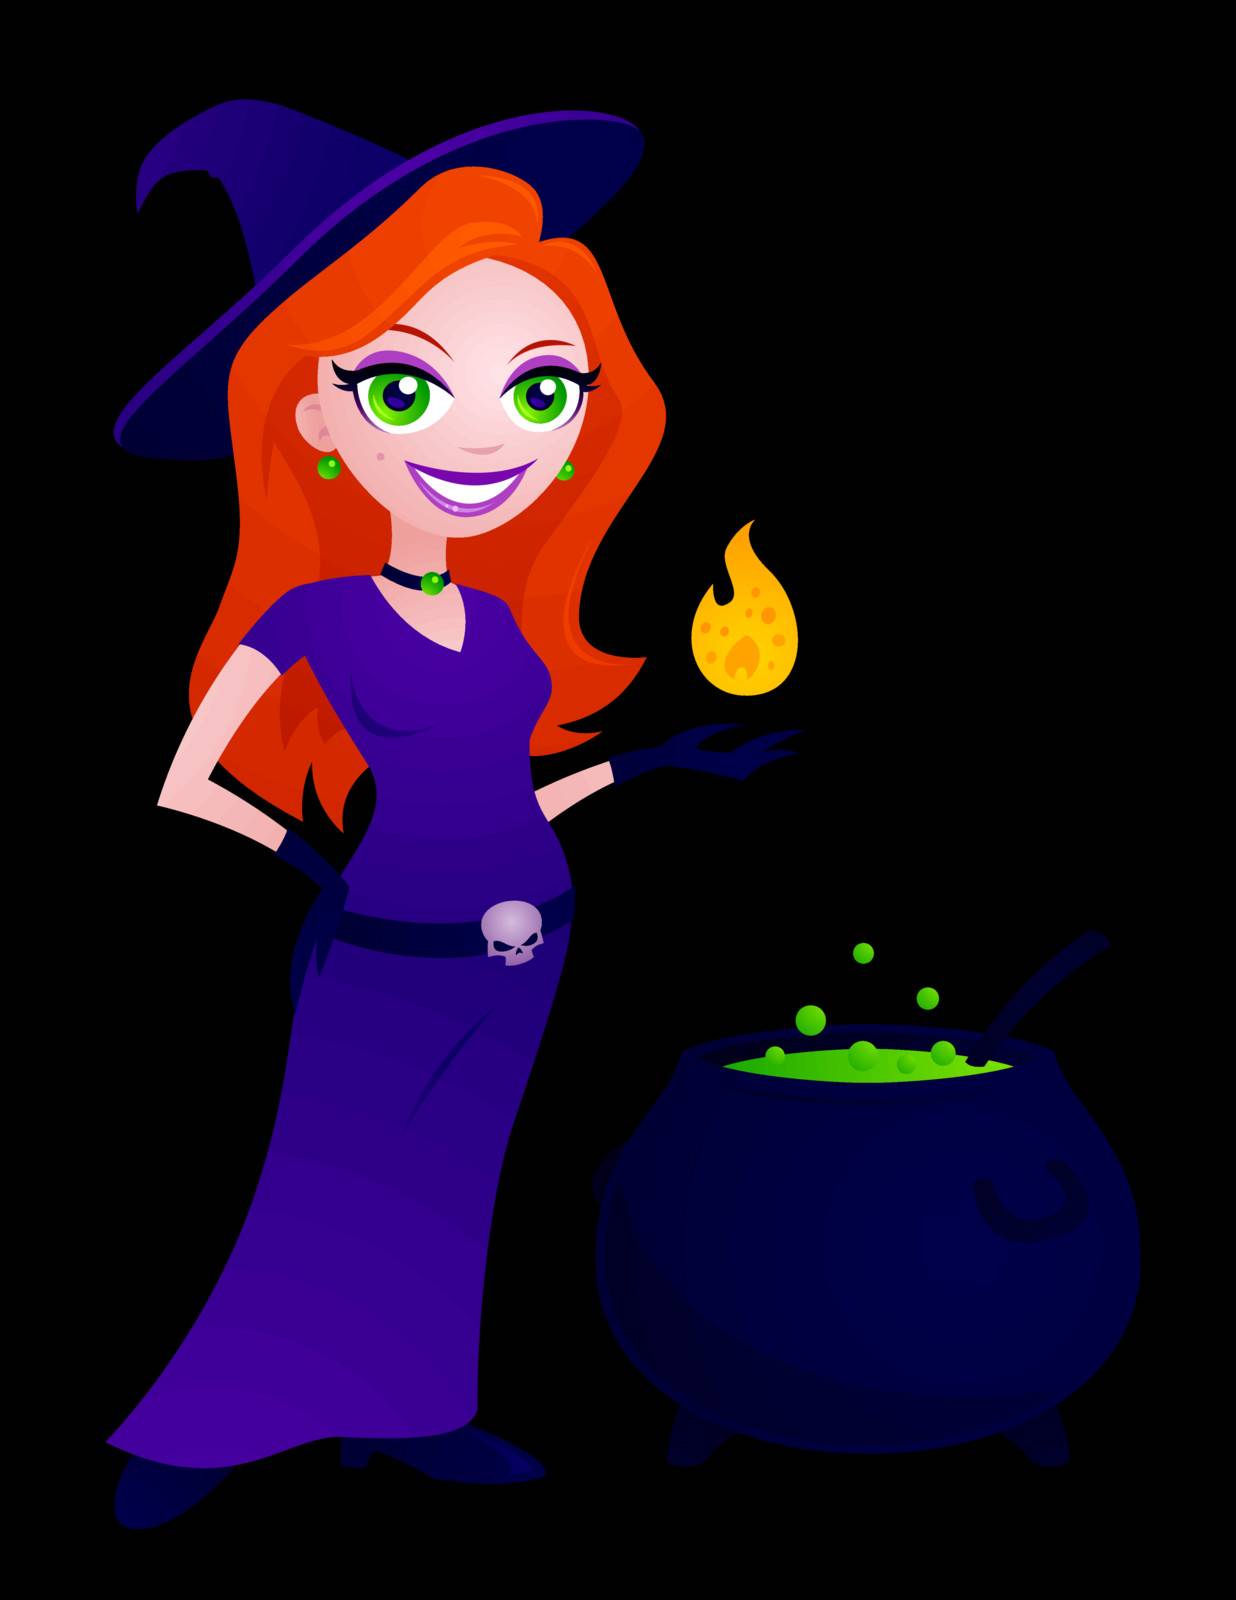 Cartoon illustration of a cute young witch holding a flame and standing next to a bubbling cauldron. Great for Halloween. Looks great on black or white background.